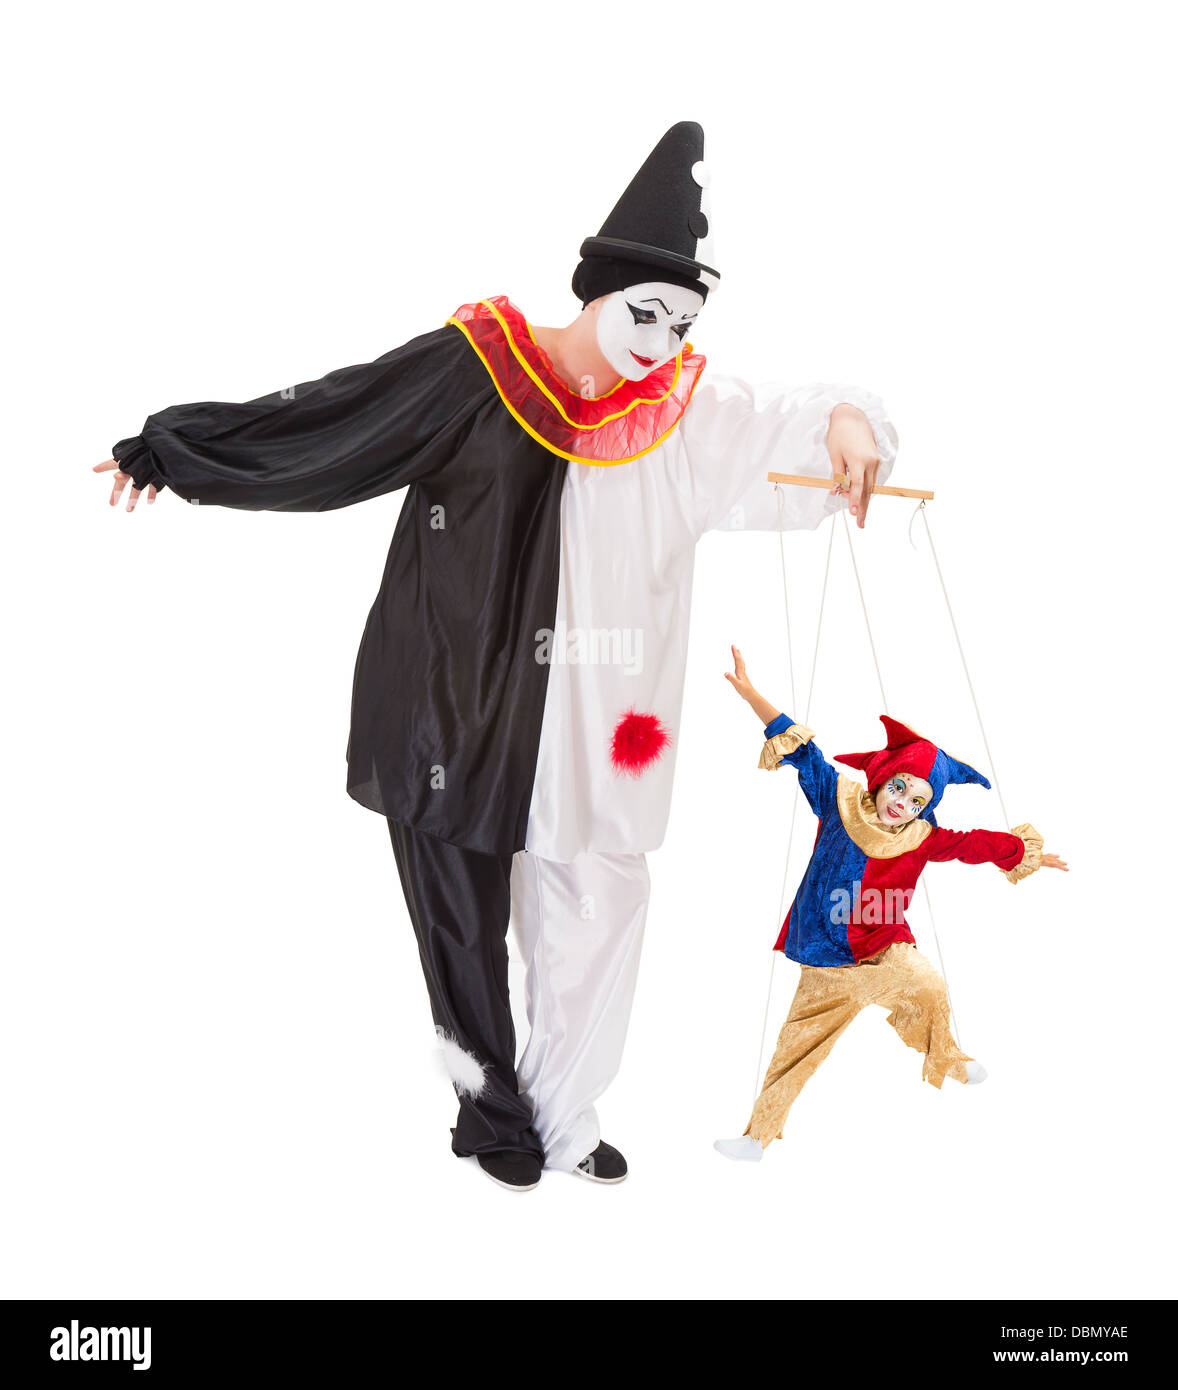 Living marionette clown on strings and a live pierrot doll Stock Photo